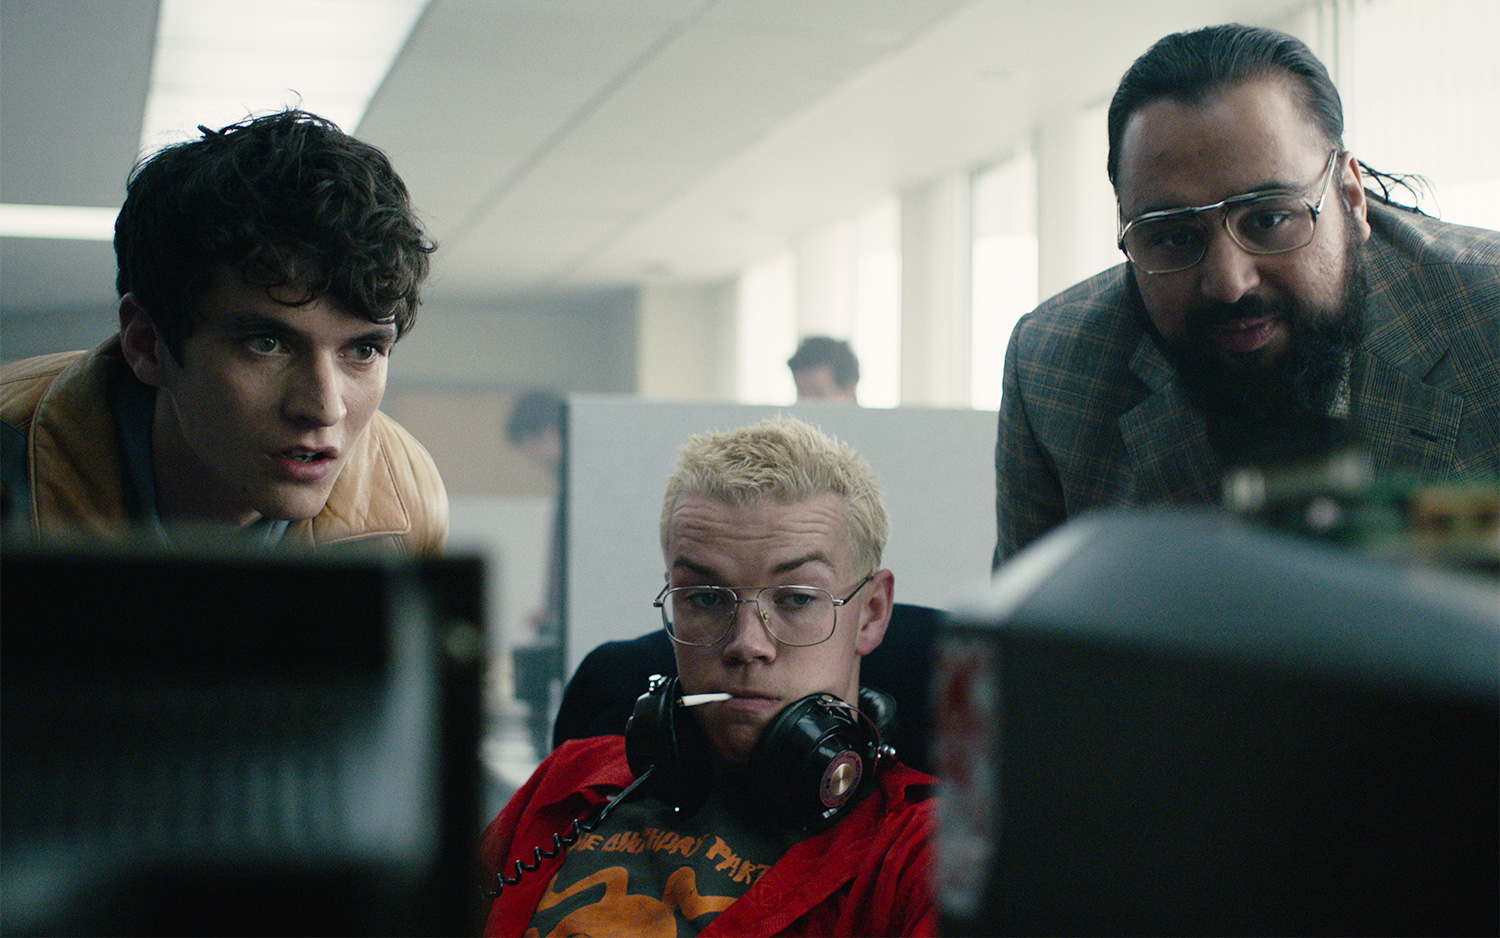 Fionn Whitehead, Will Poulter and Asim Chaudhry in Black Mirror Bandersnatch, one of the best Netflix movies